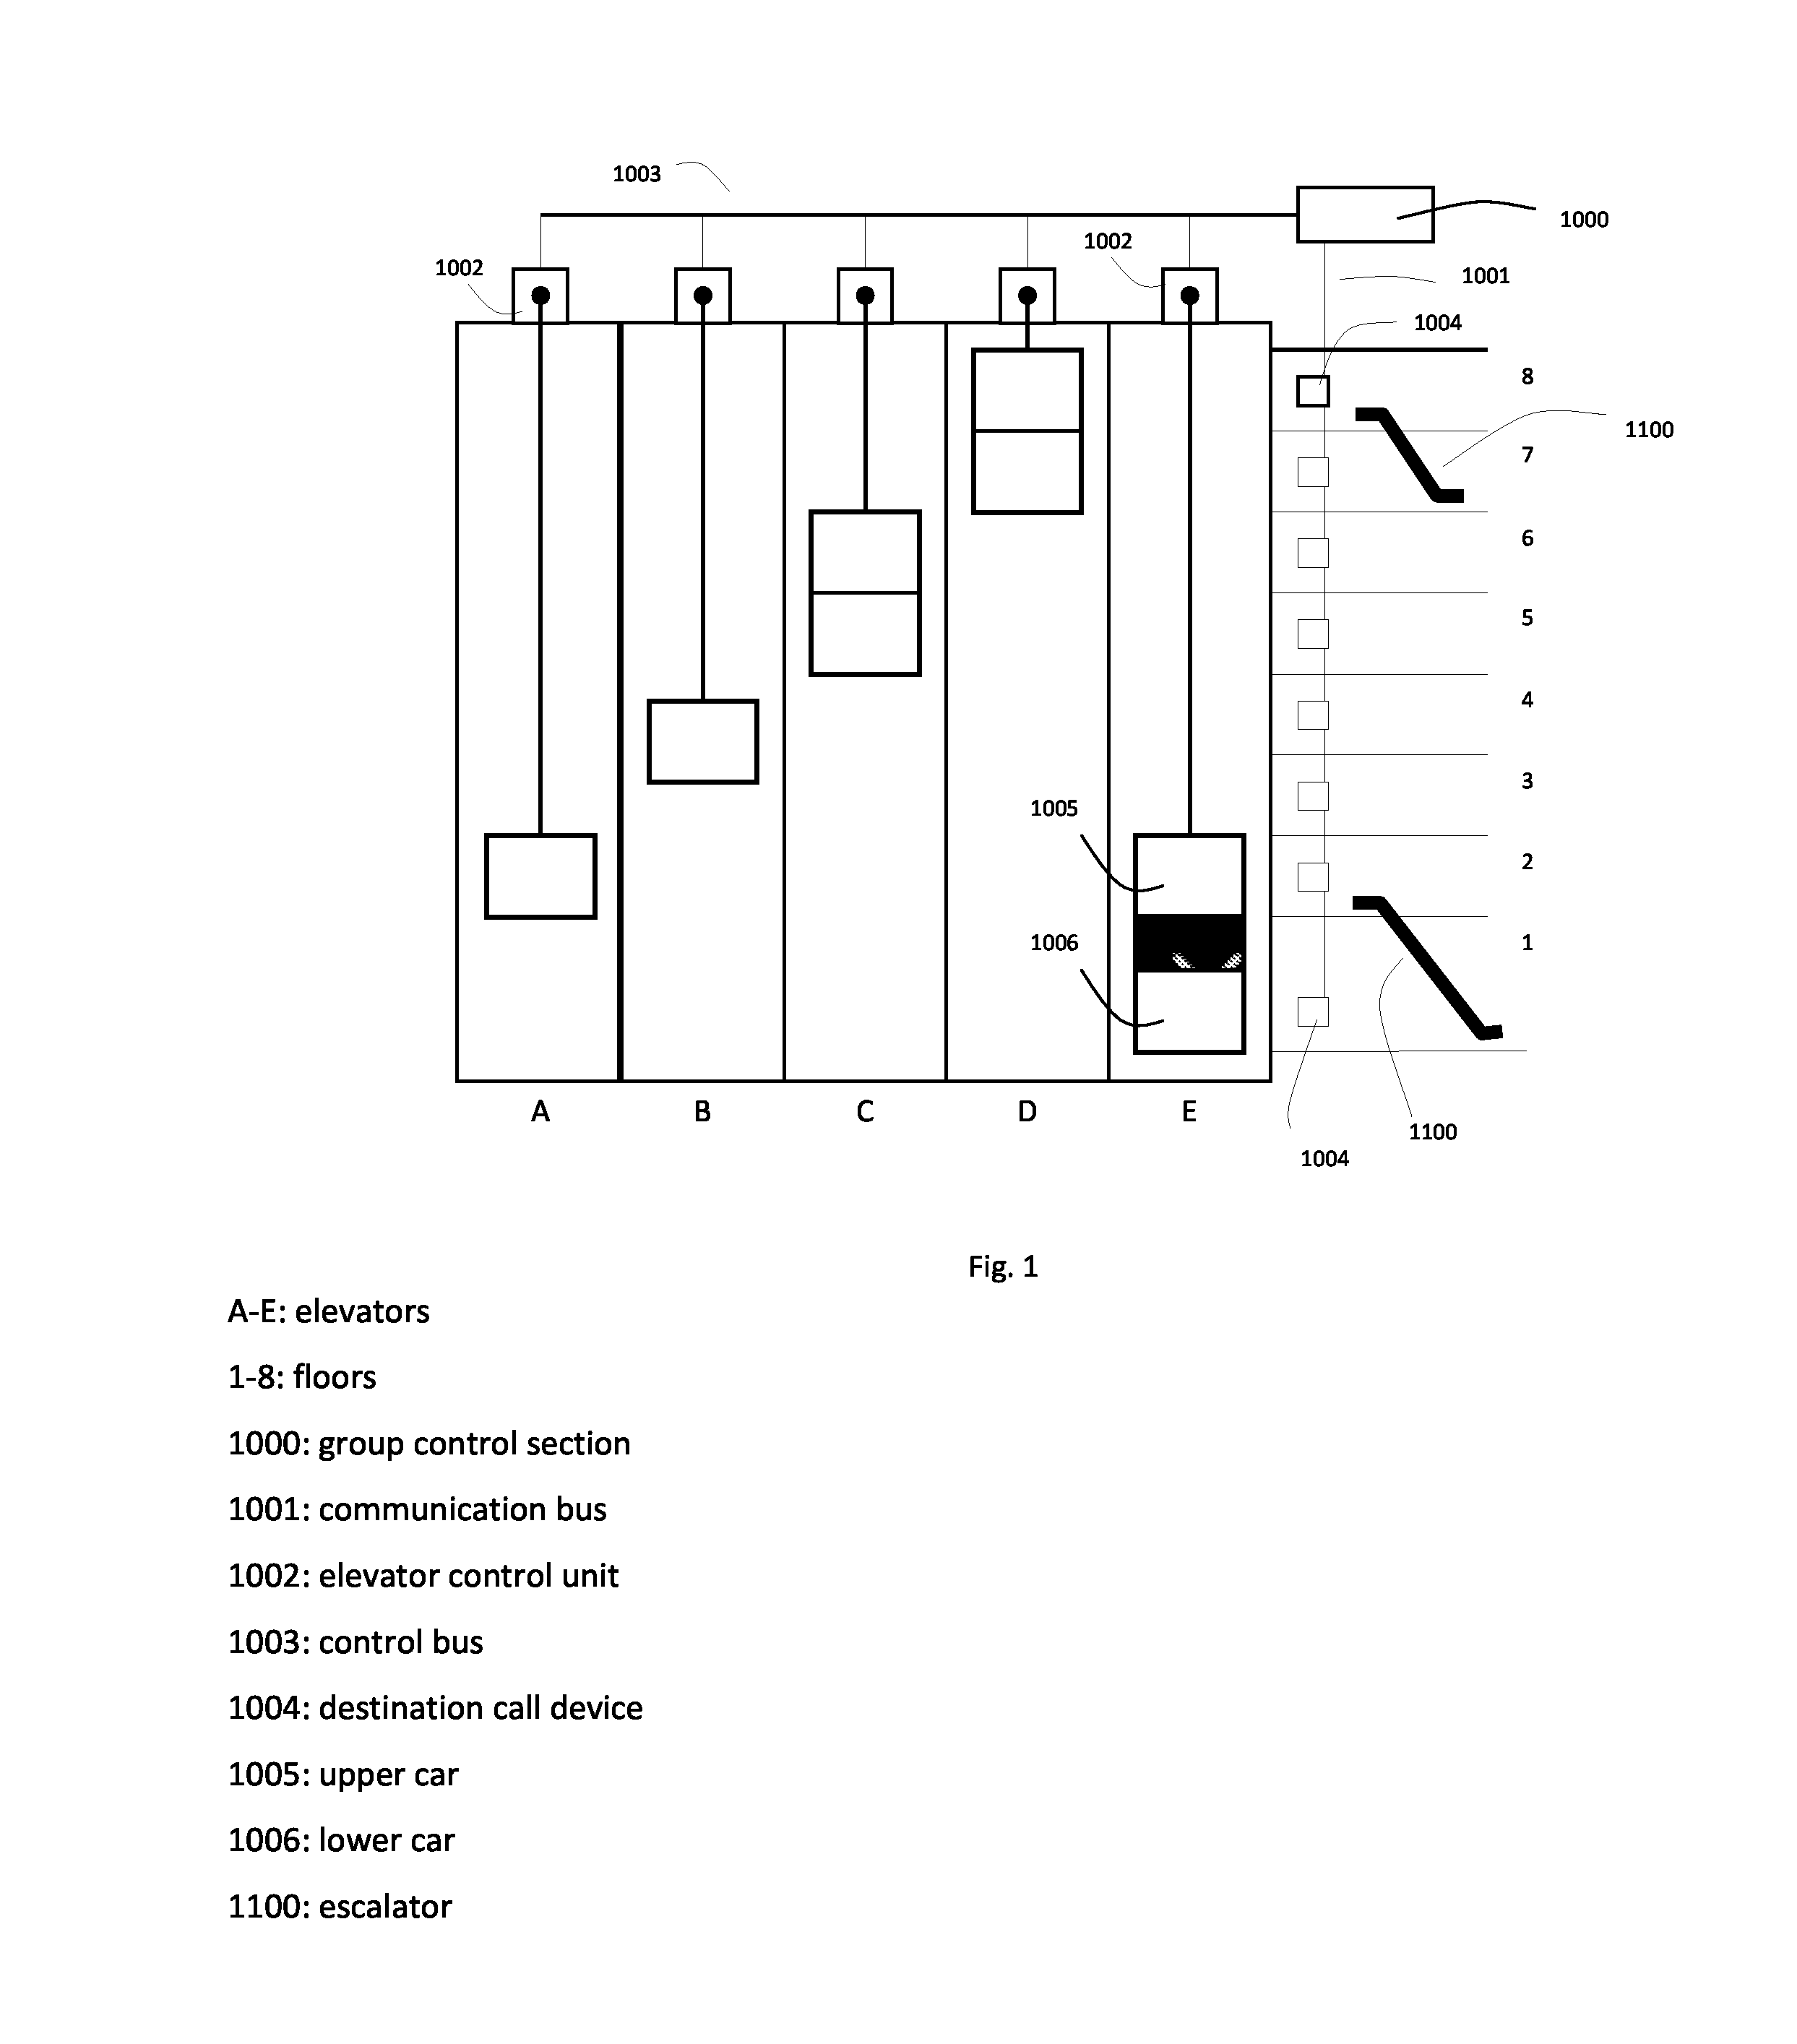 Method and system for allocation of destination calls in elevator system